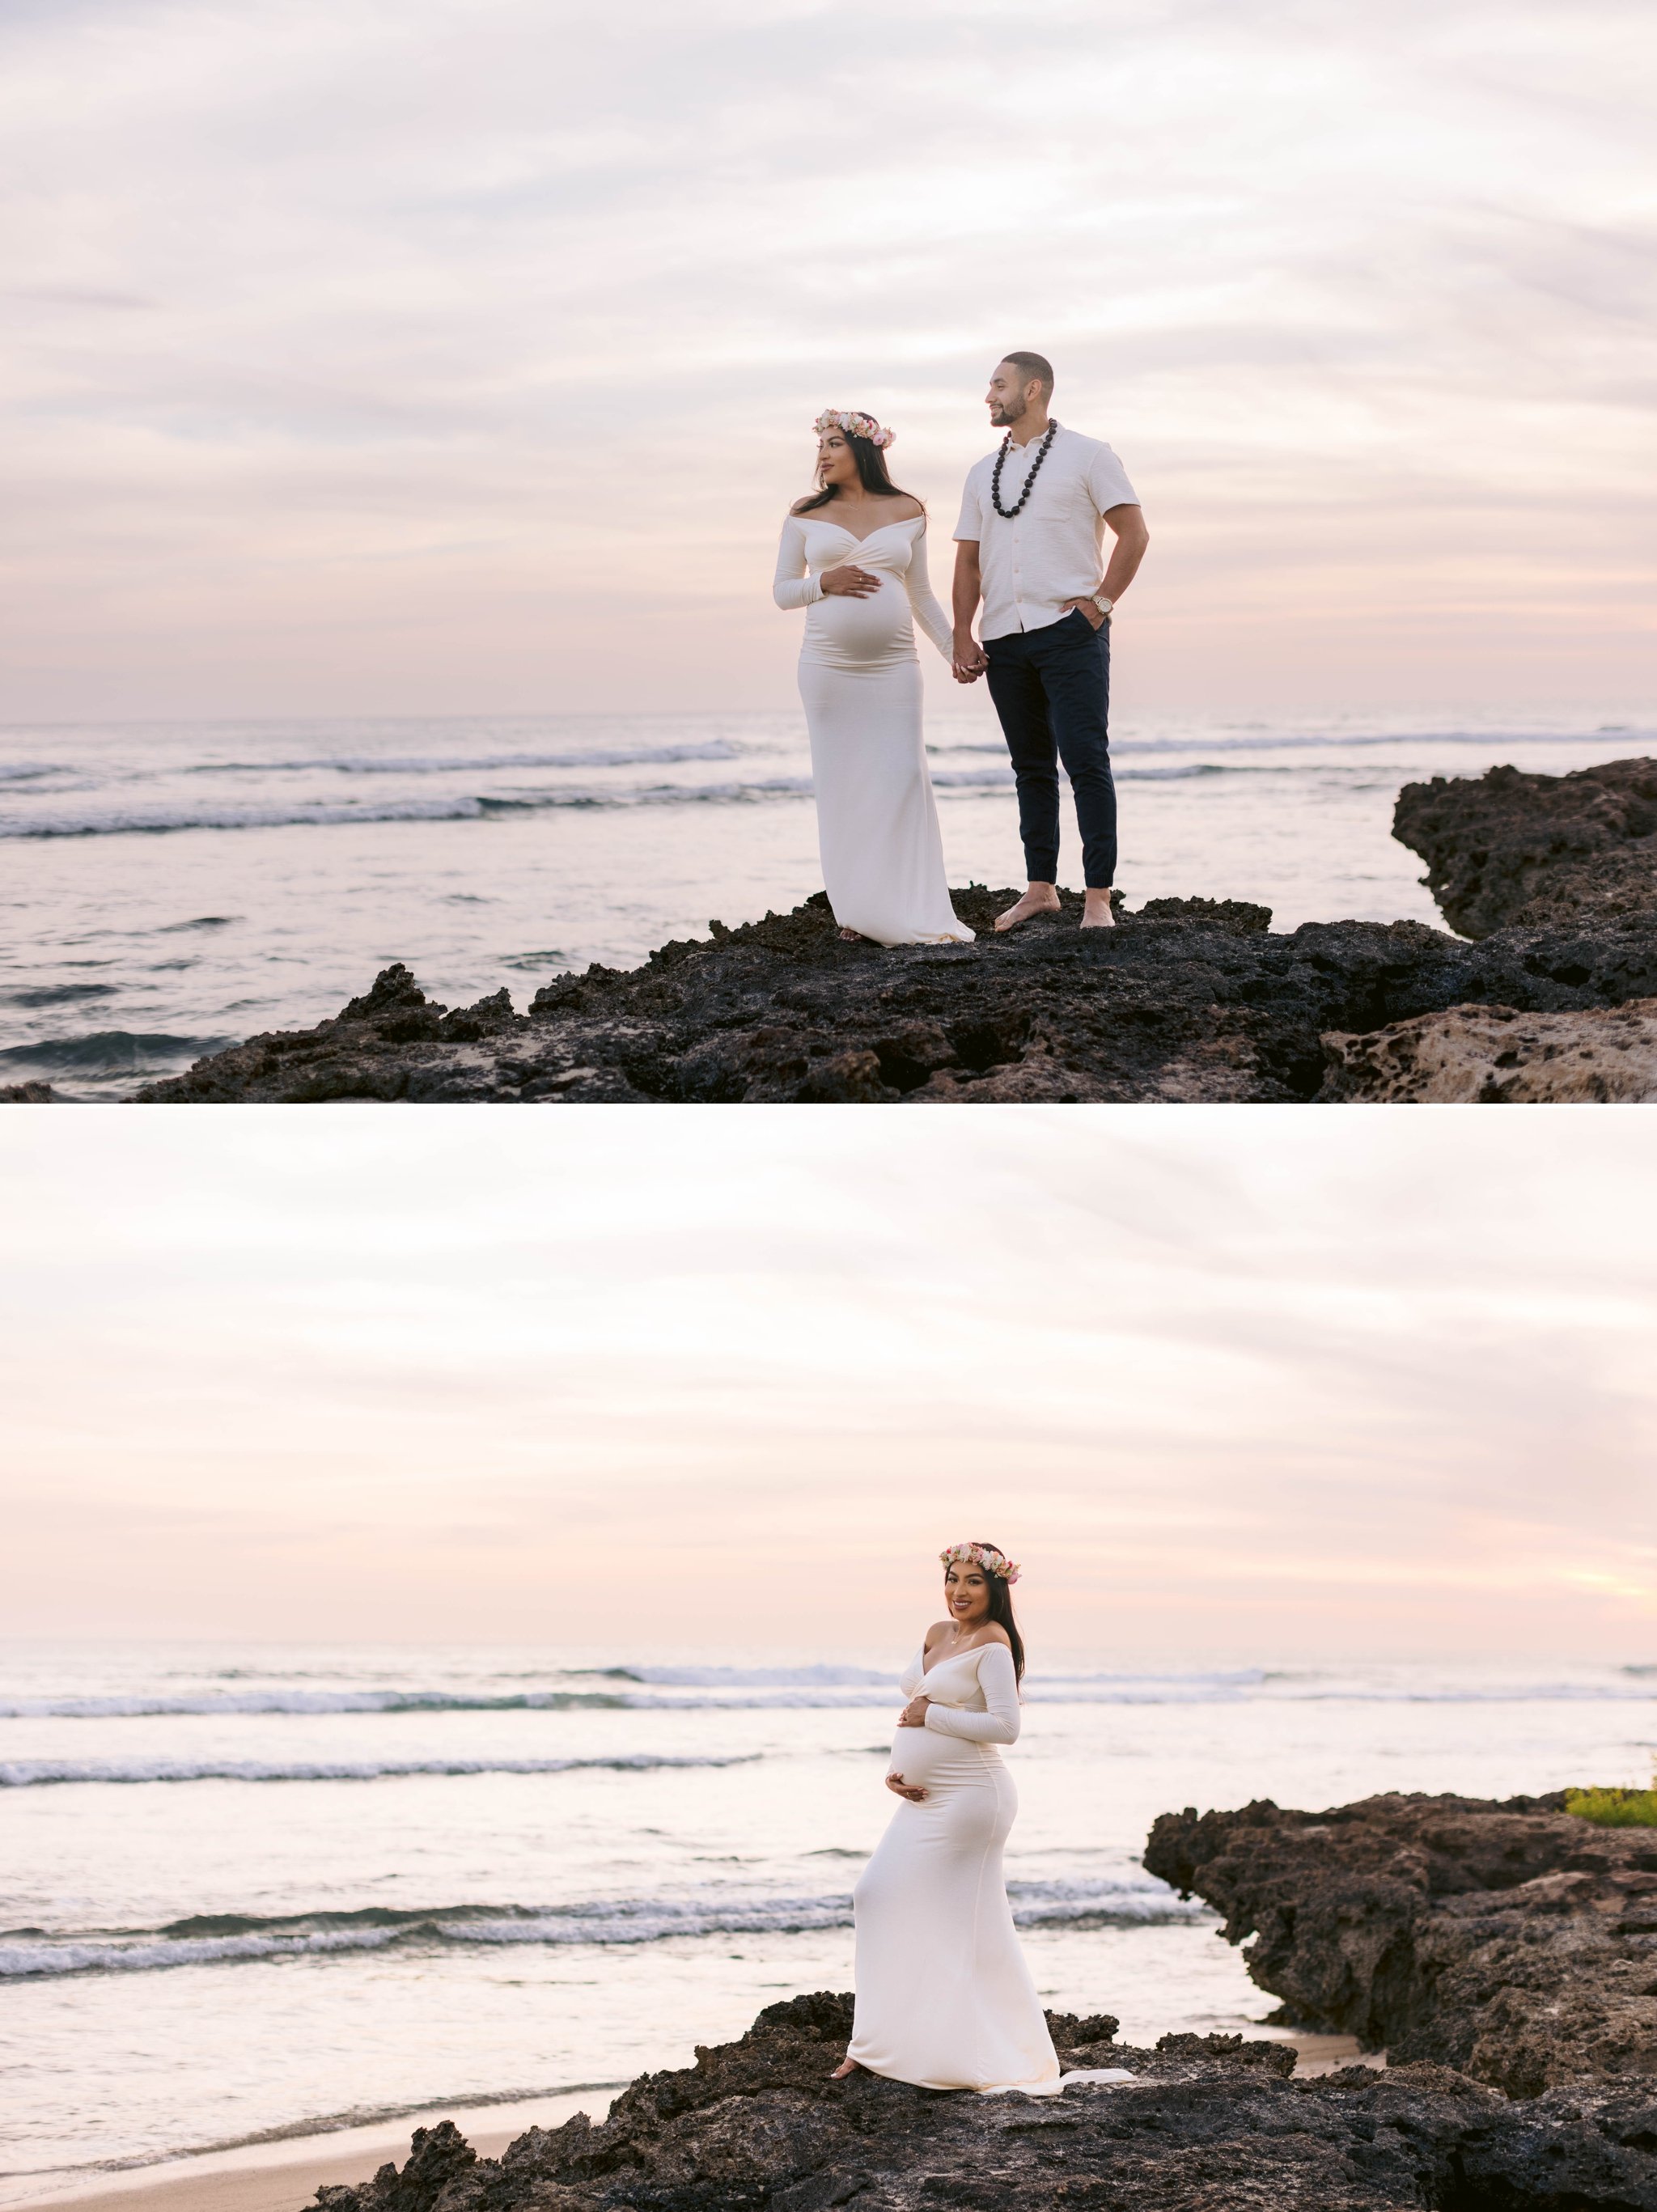 Romantic sunset maternity photography session at the beach - oahu family photographer